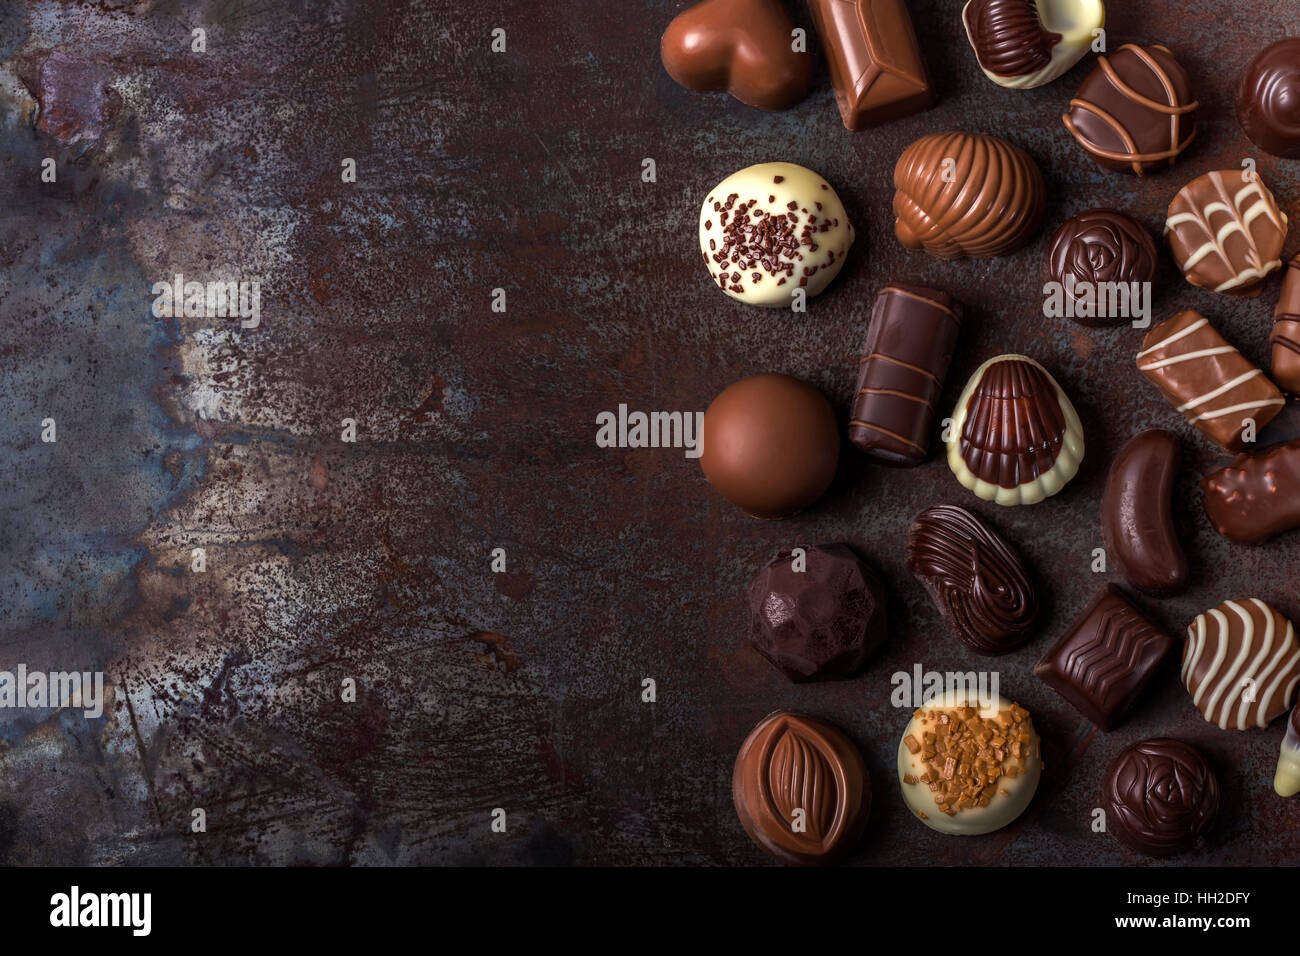 Assortment of fine chocolate candies, white, dark, and milk chocolate. Sweets background with copy space. Top view Stock Photo